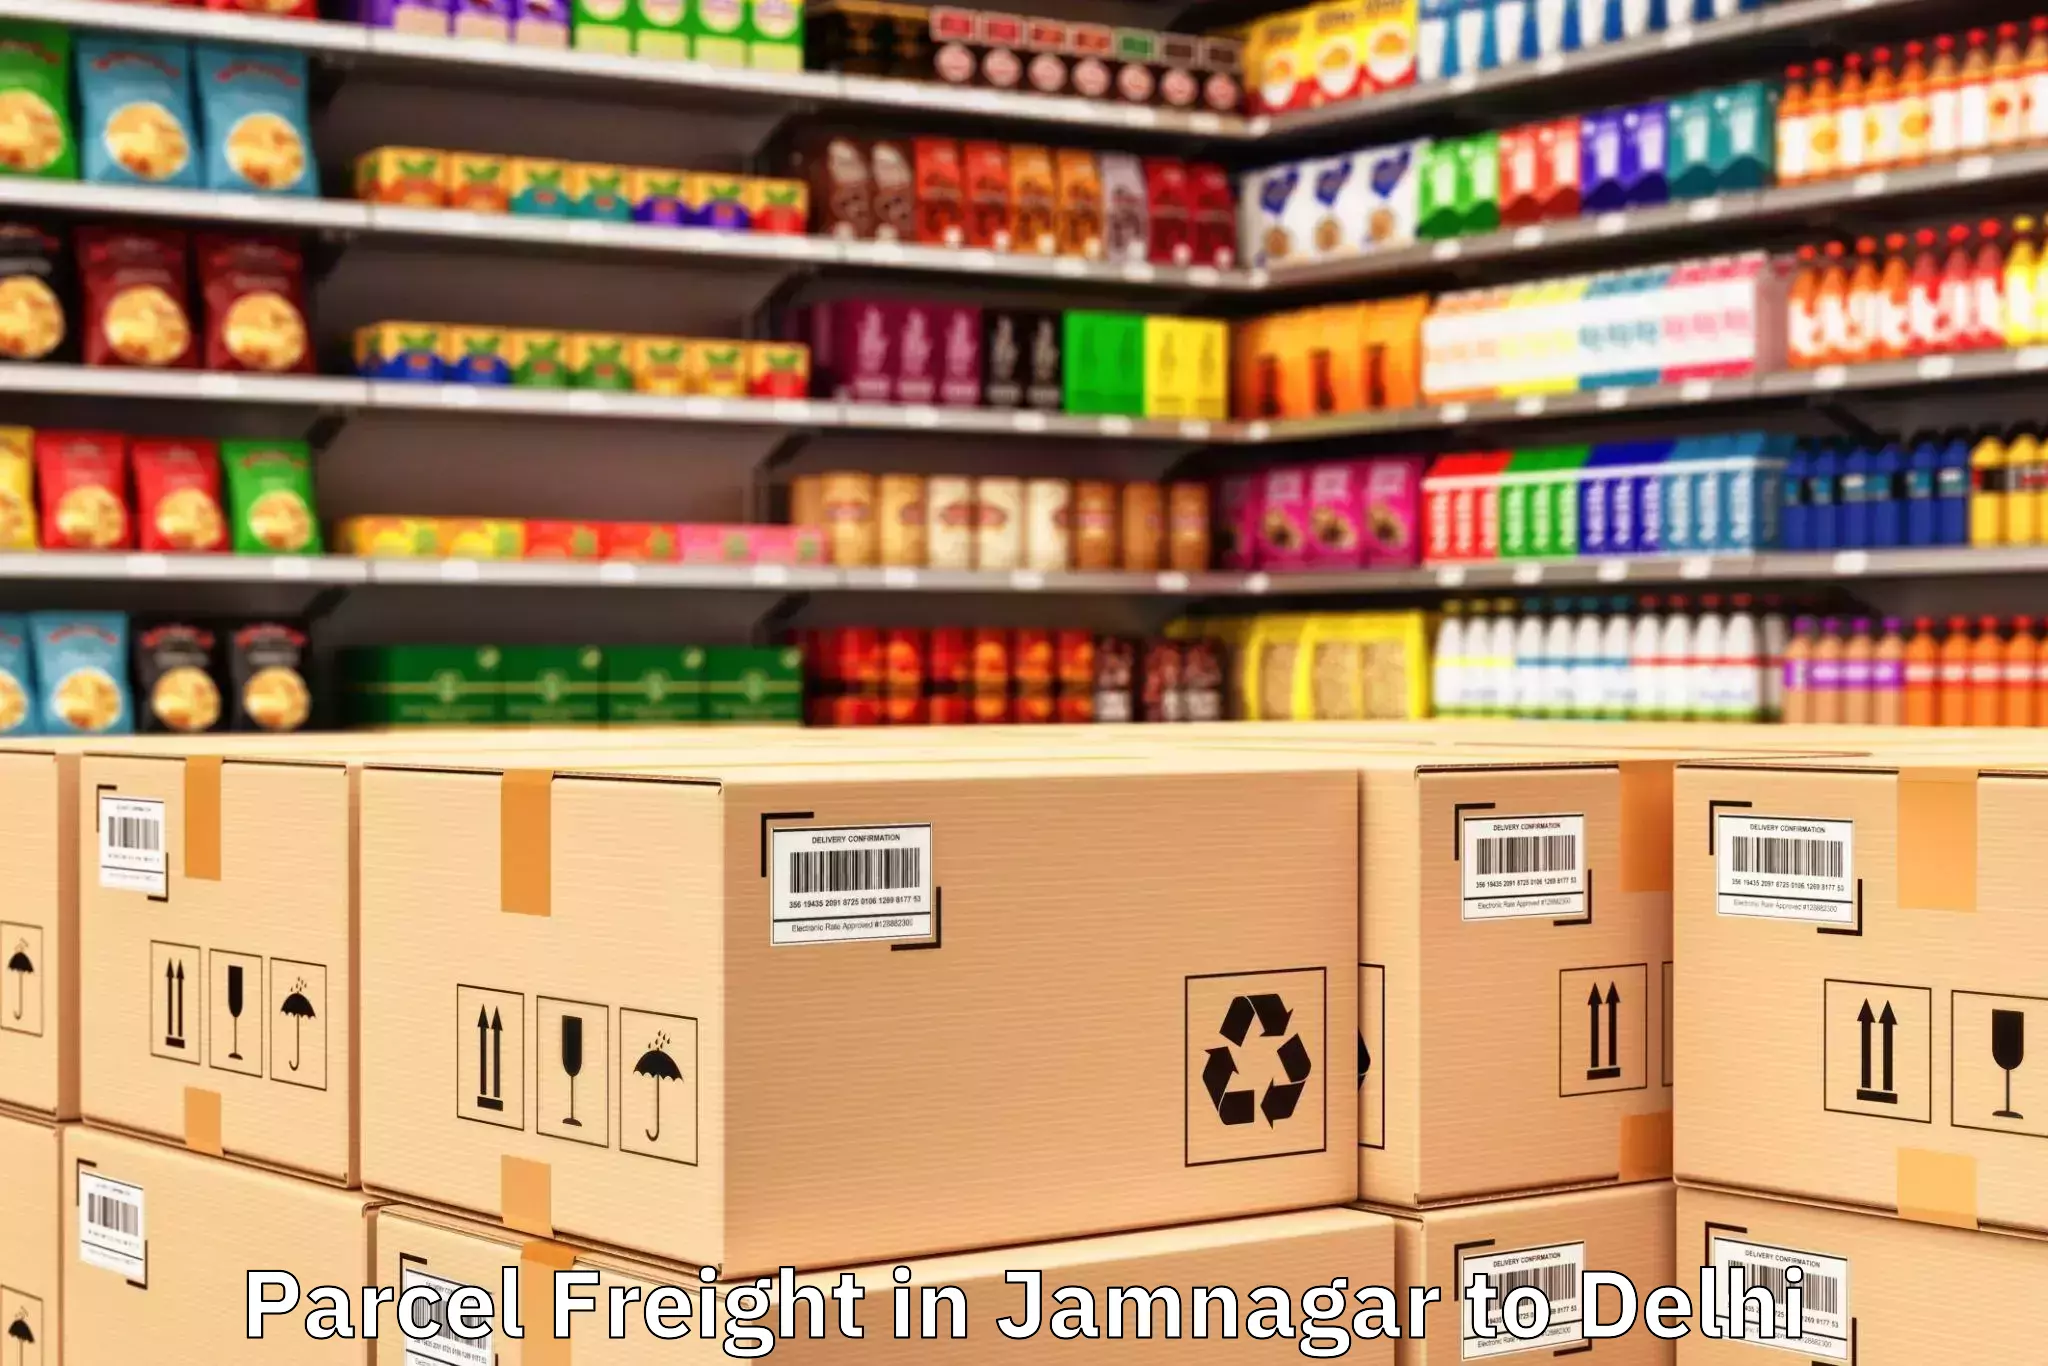 Easy Jamnagar to City Centre Mall Dwarka Parcel Freight Booking